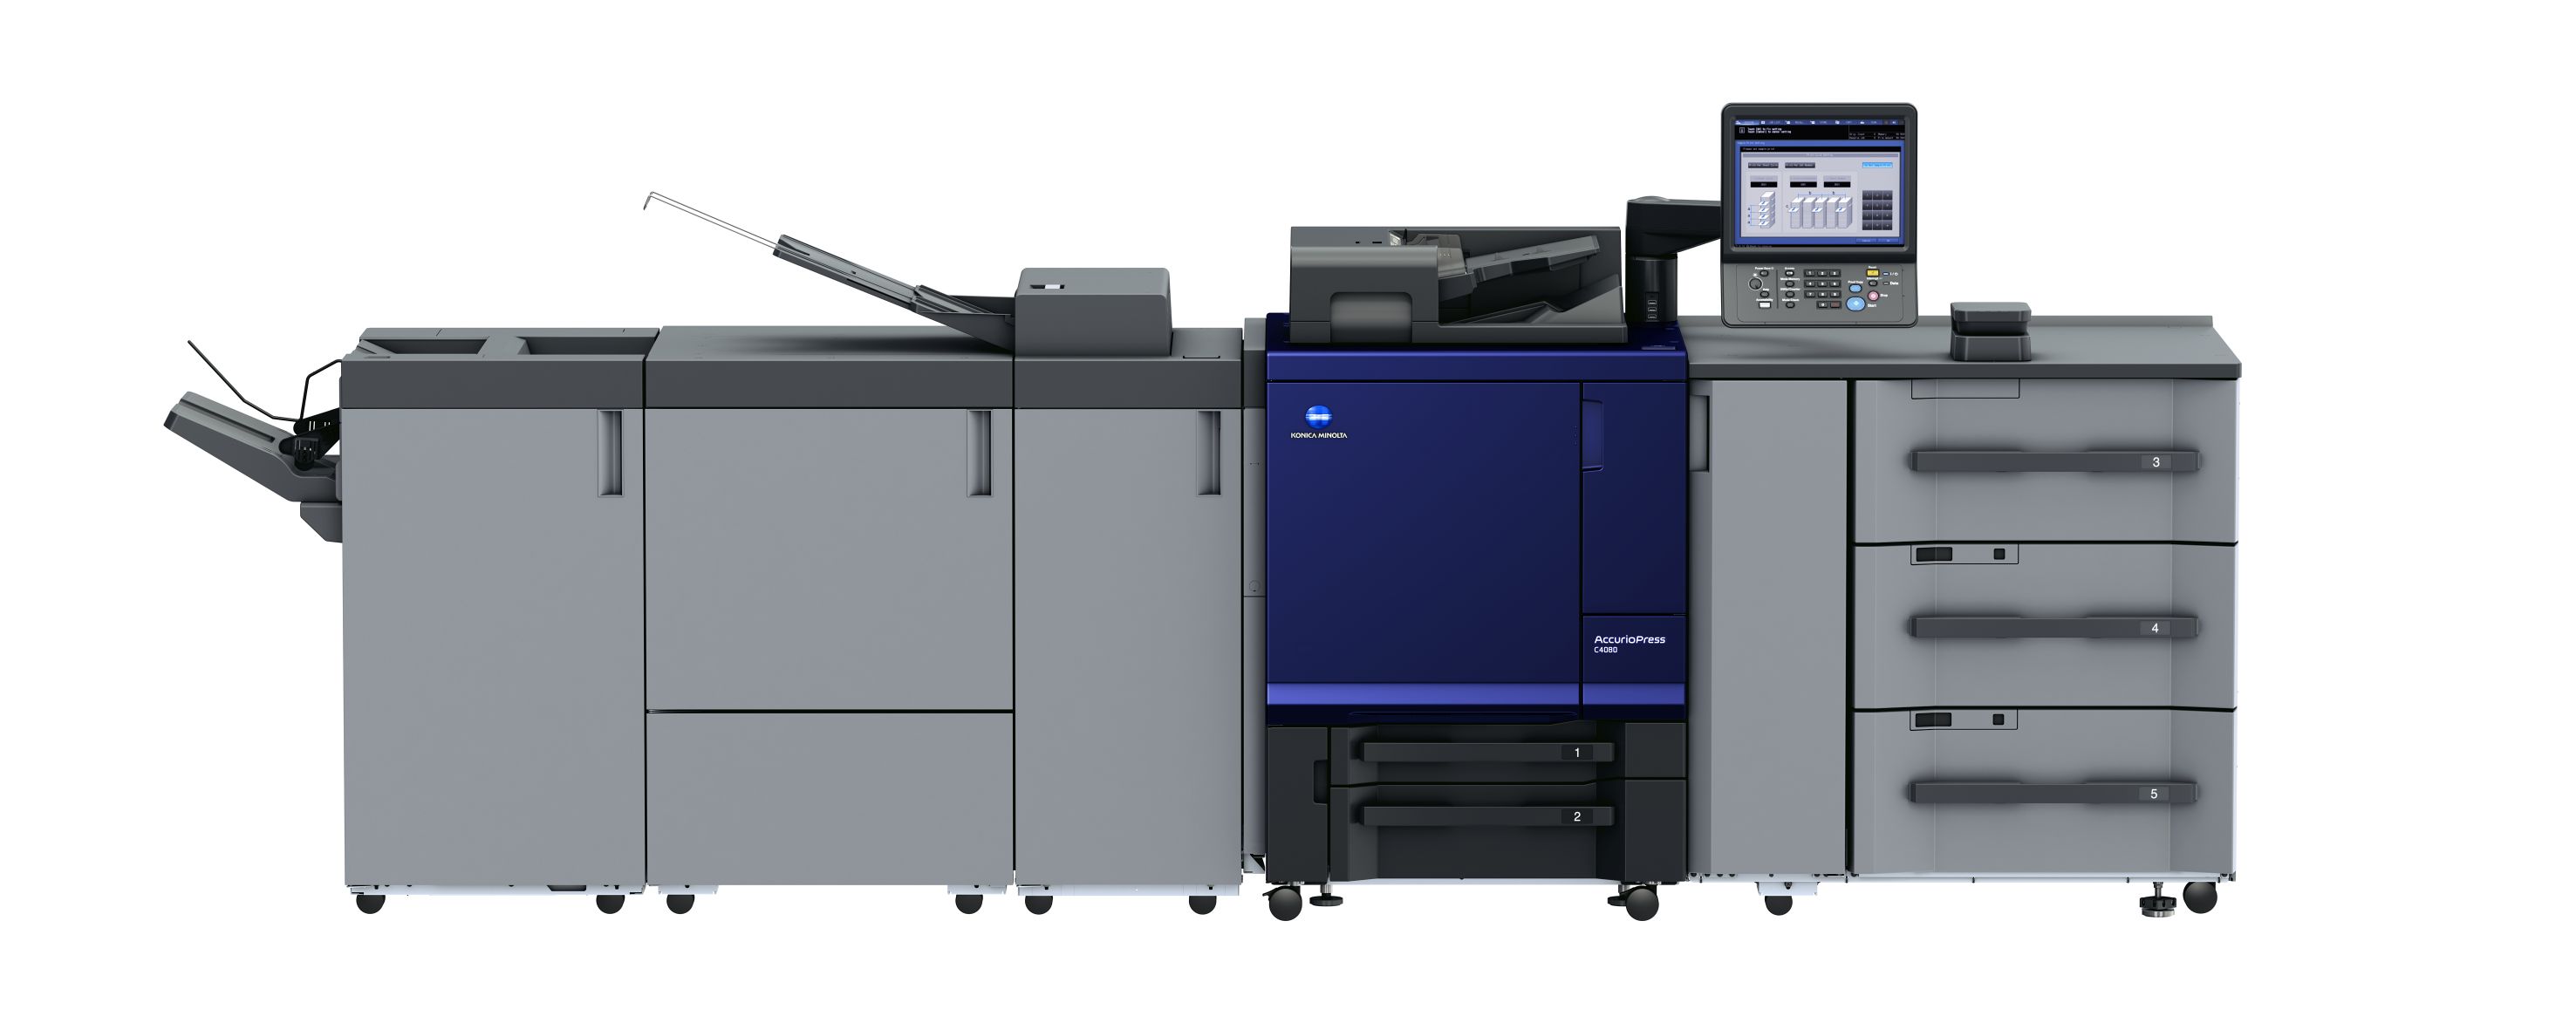 Konica Minolta's AccurioPress C4080 high-speed digital press offers robust and user-friendly production and is a perfect fit for businesses looking to expand their production capabilities with advanced automation and ease of use for various applications.